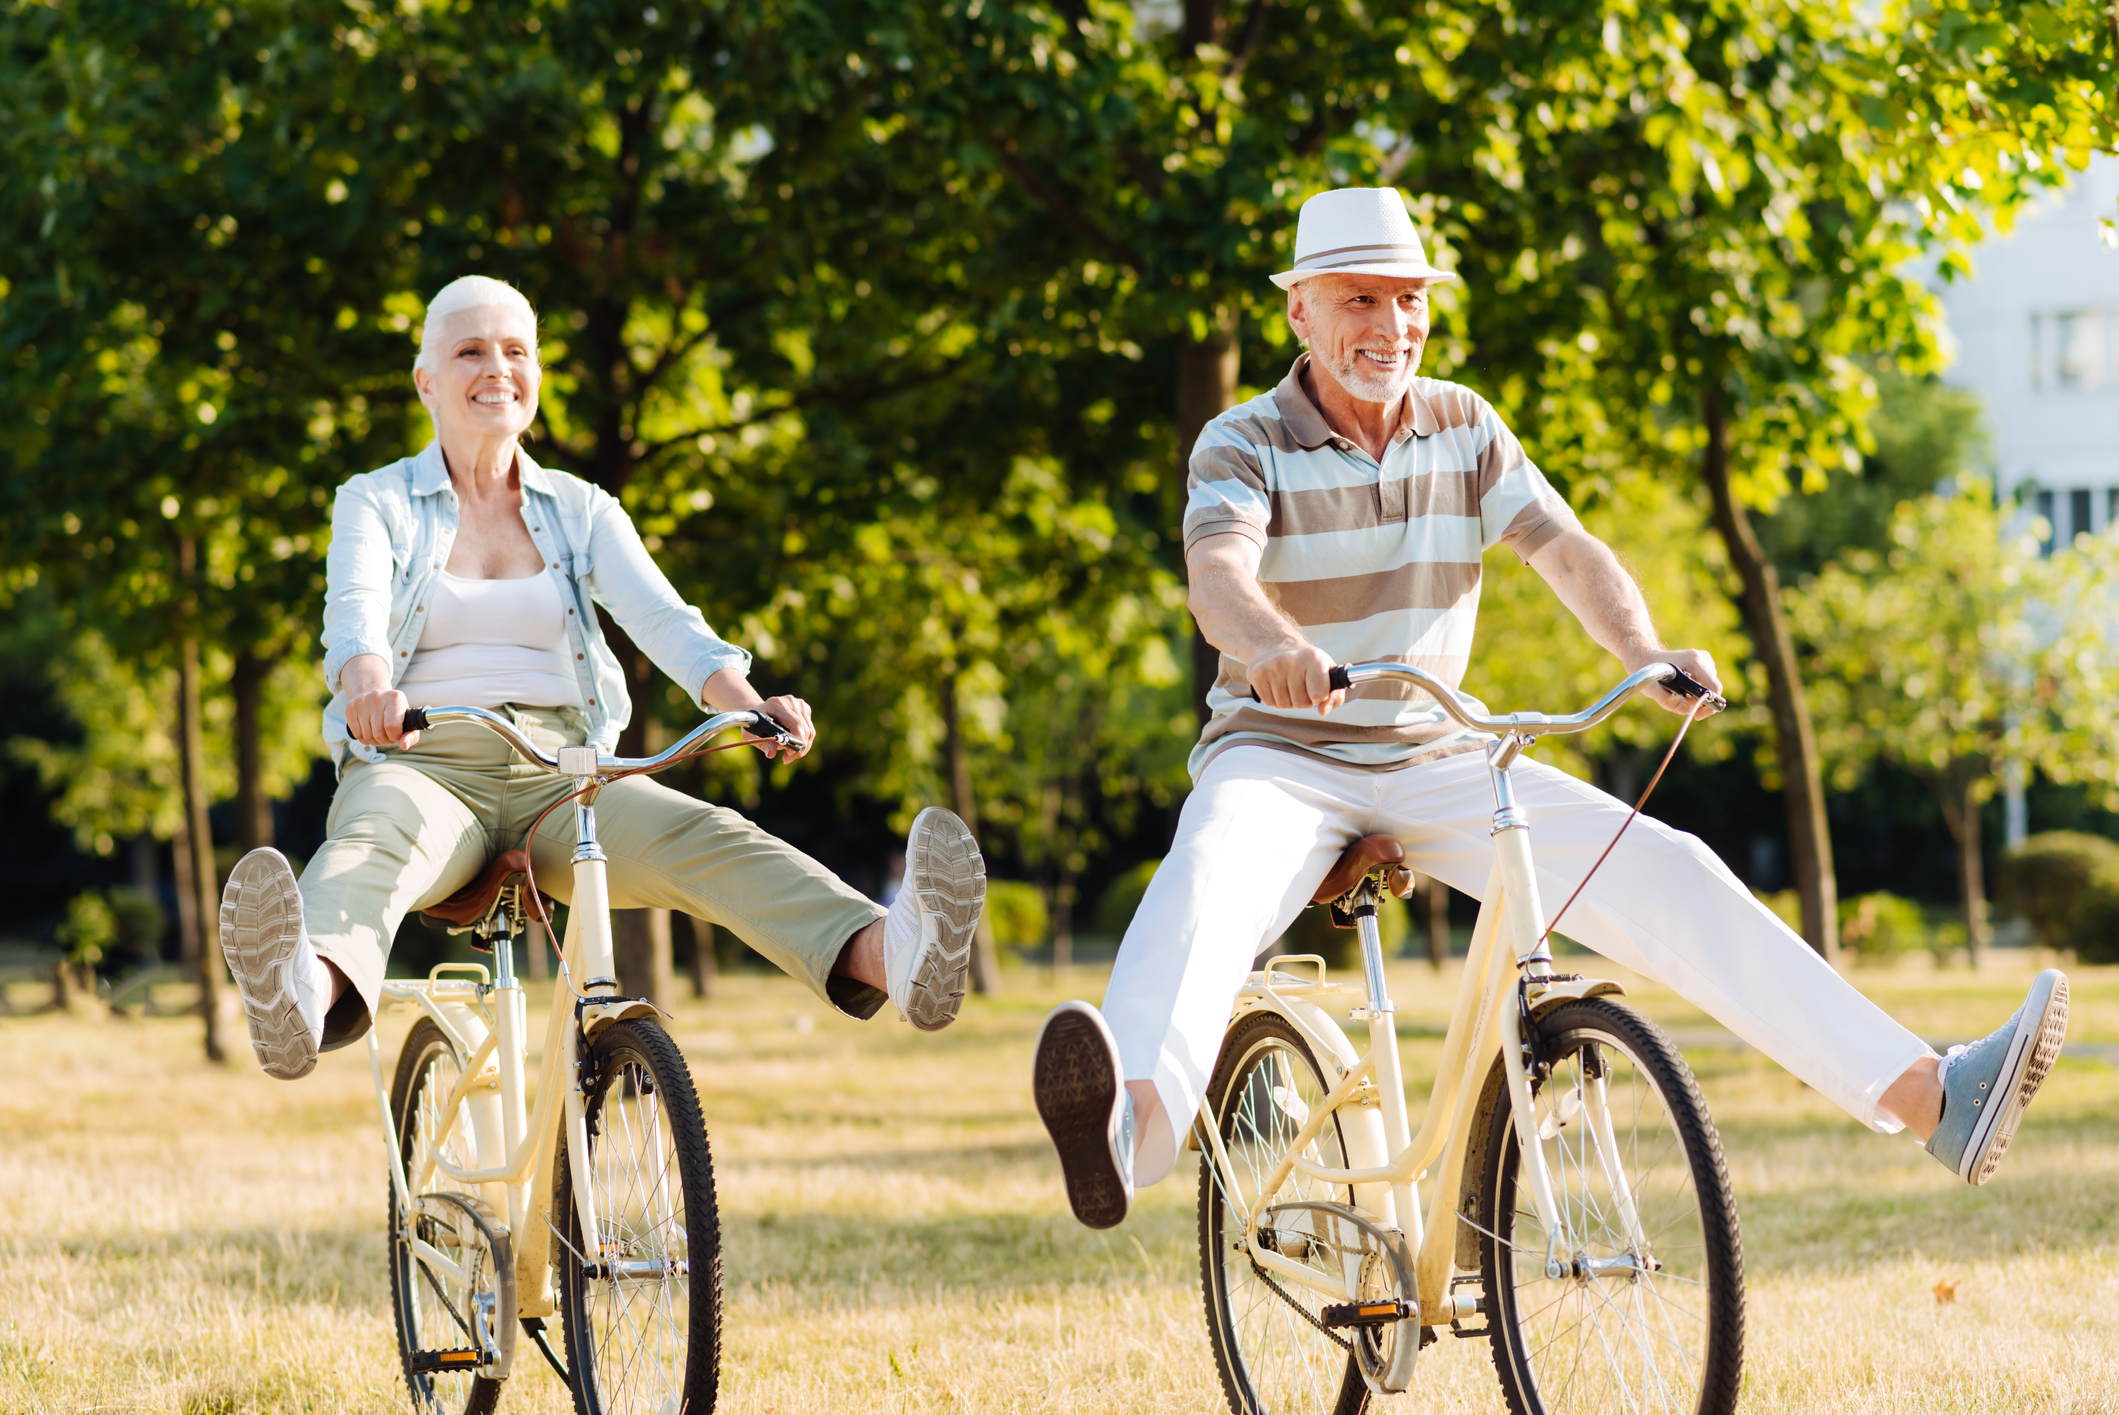 Photo of two older adults playfully riding bicycles